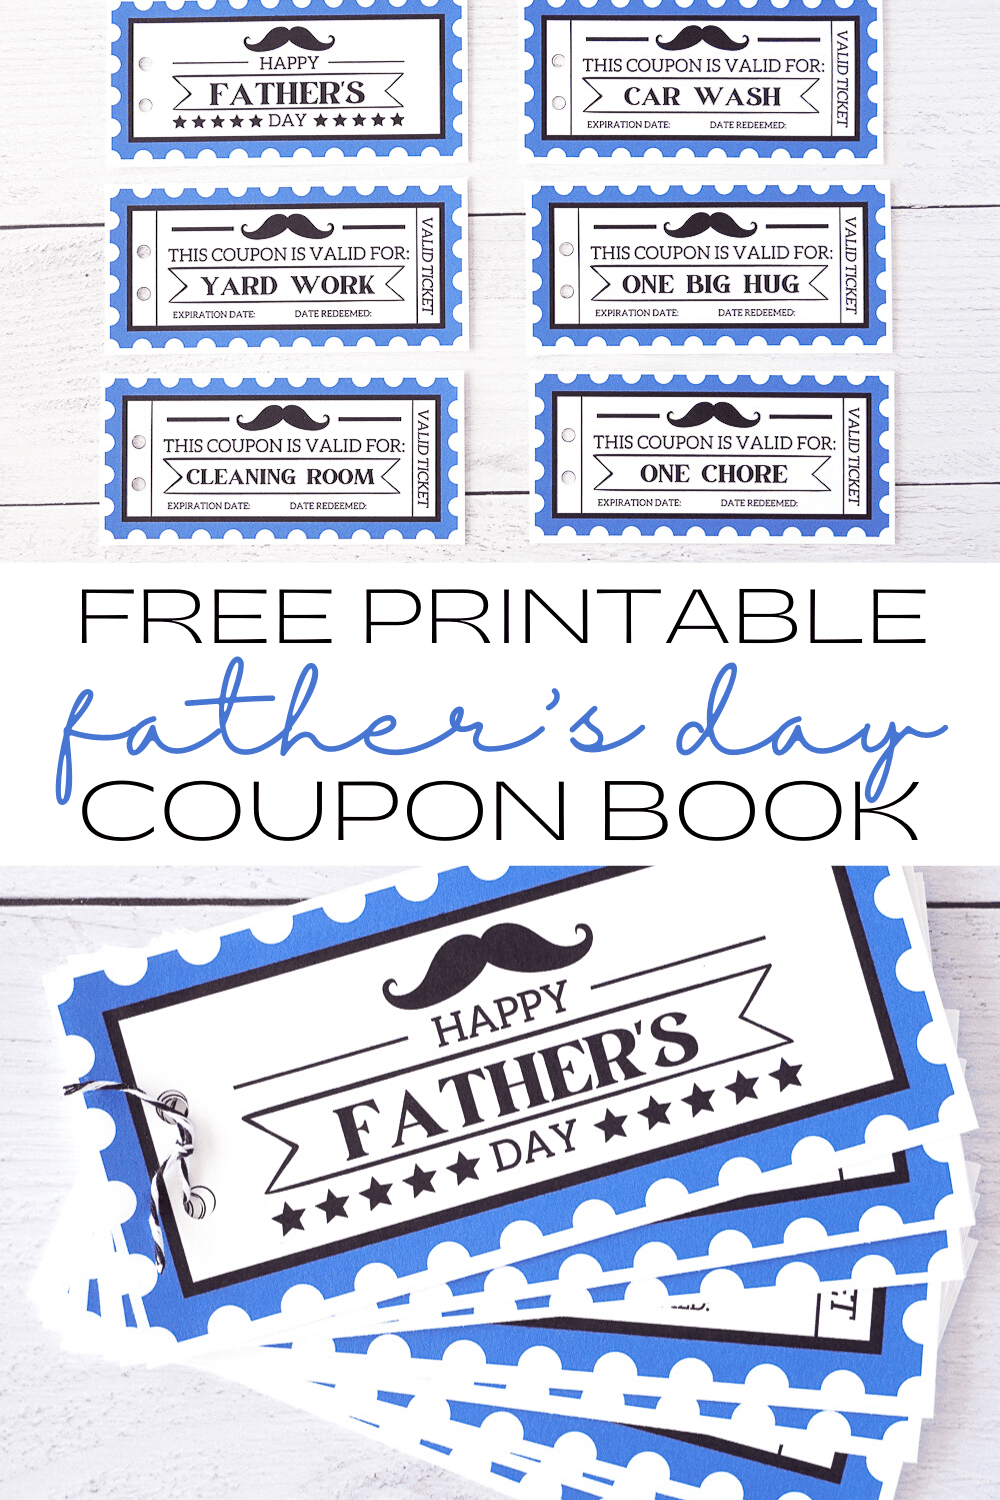 free printable coupons for Father's Day